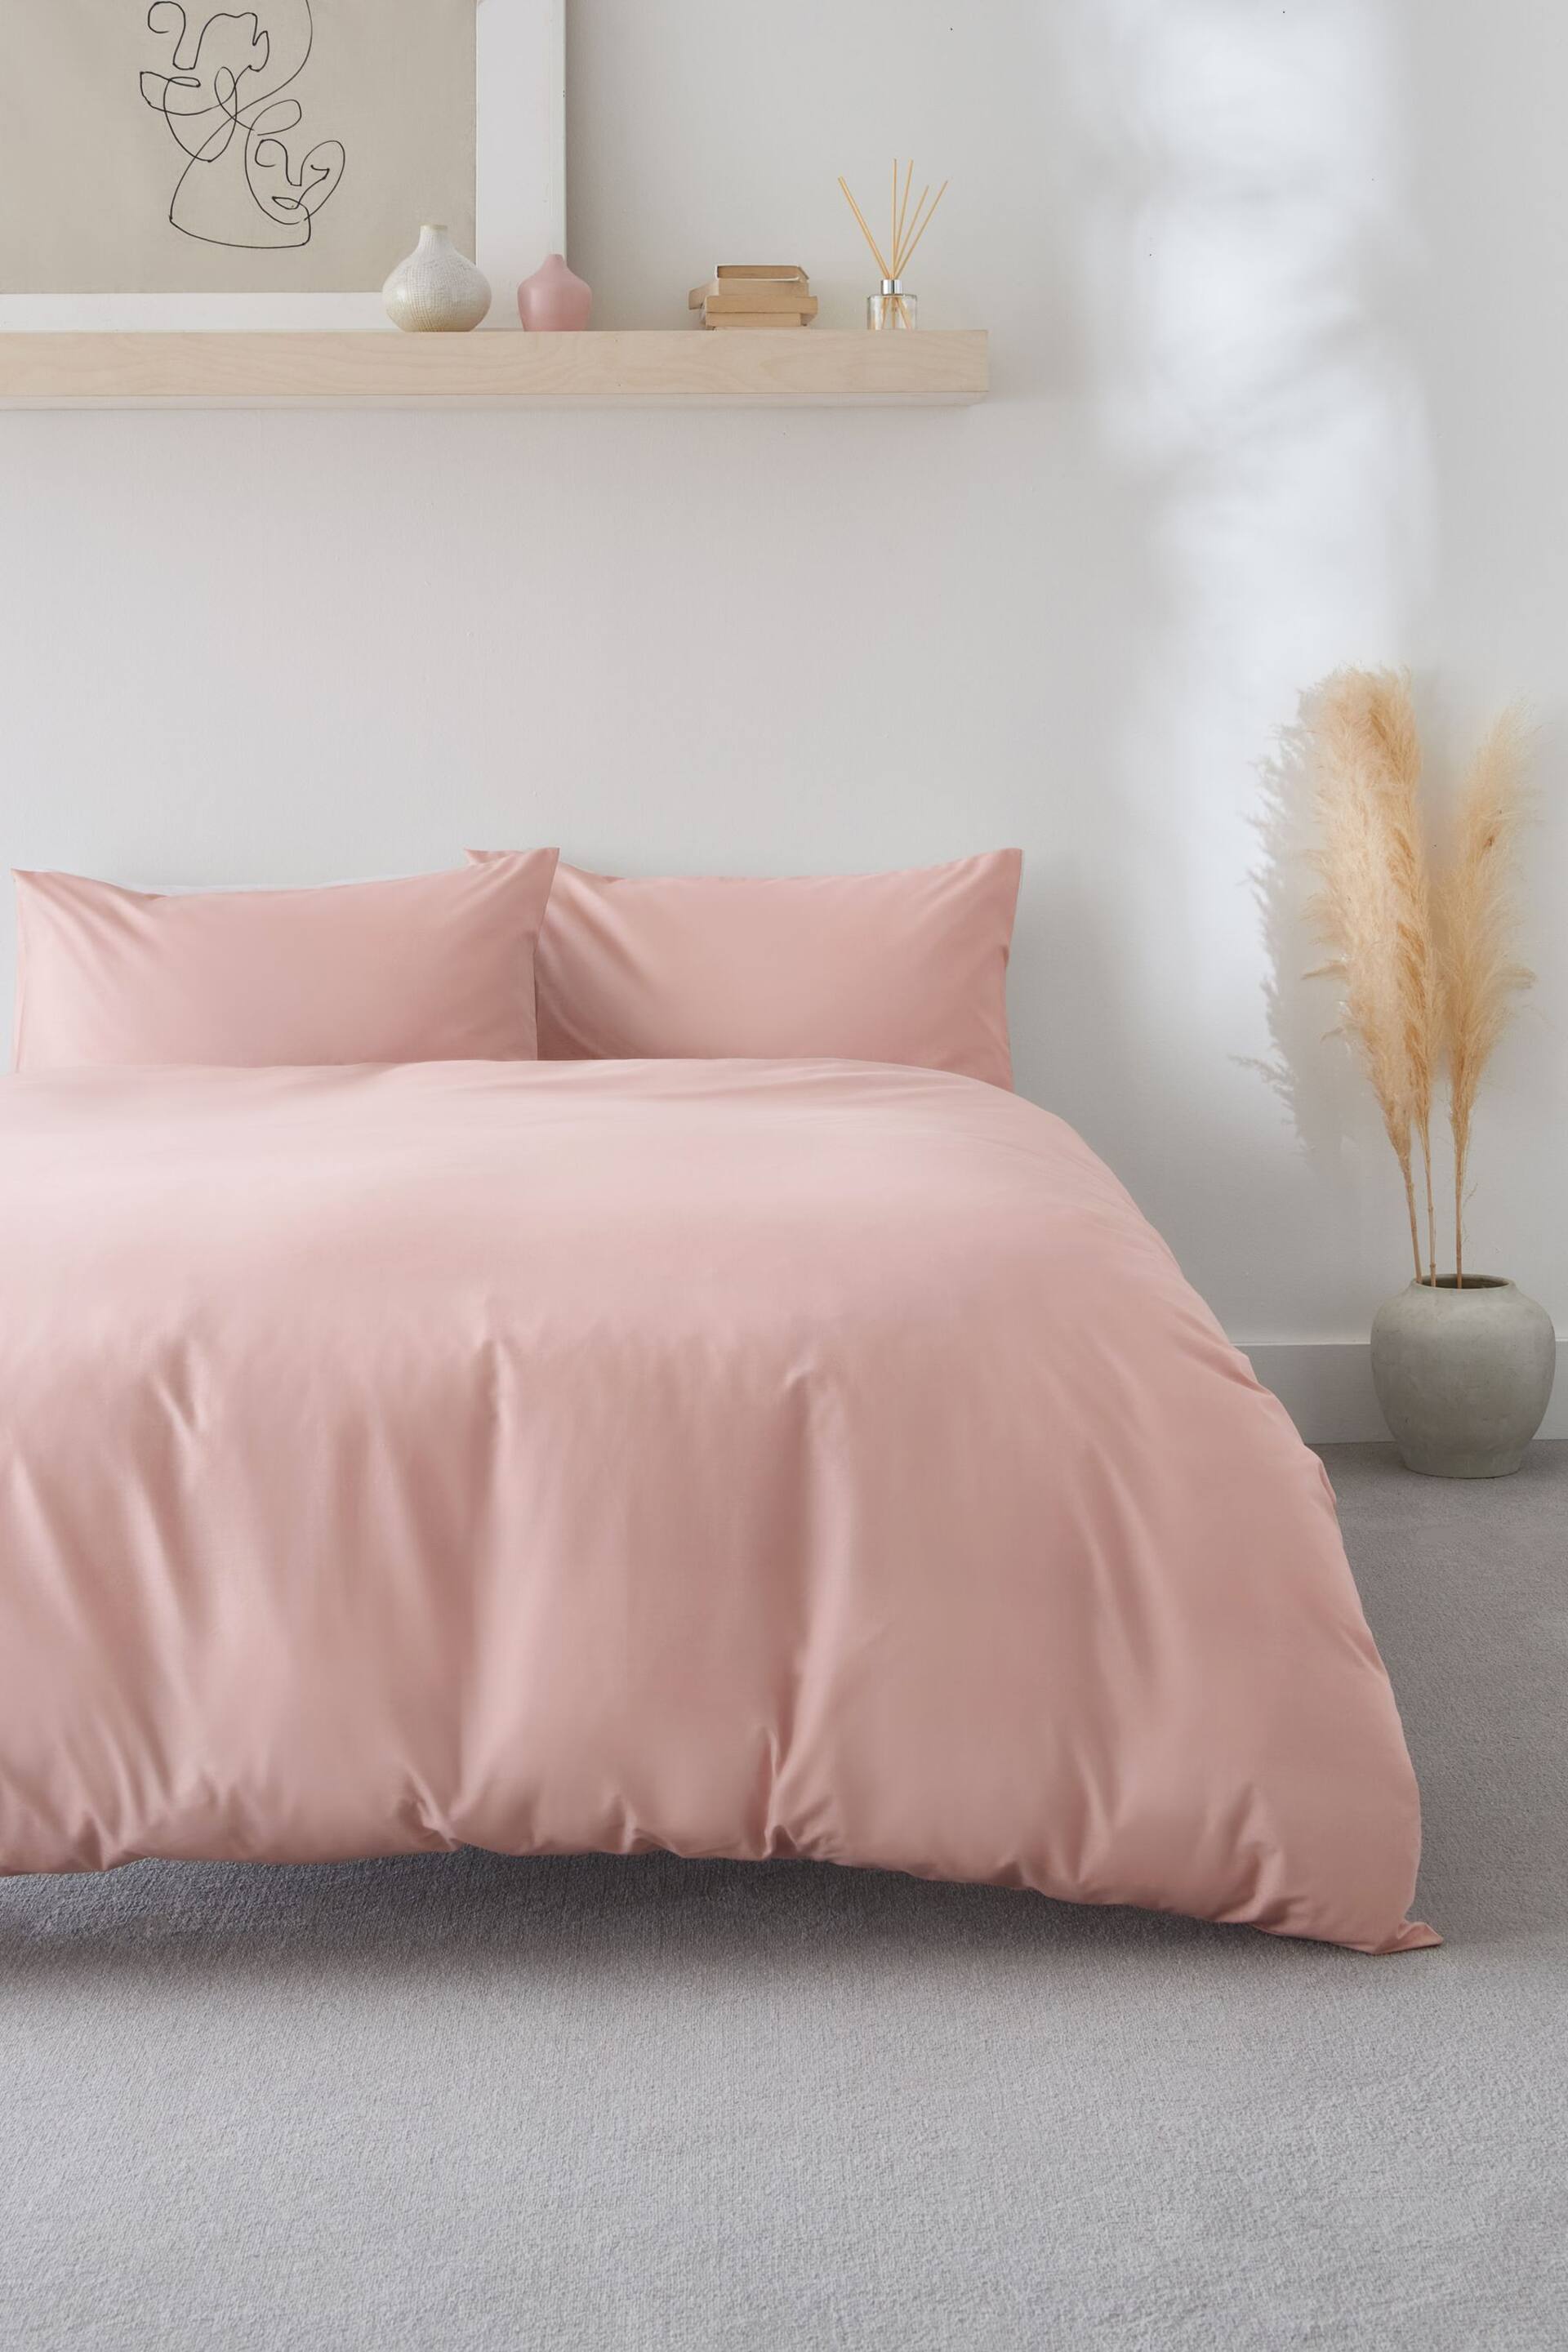 Pink Easy Care Polycotton Plain Duvet Cover and Pillowcase Set - Image 1 of 6